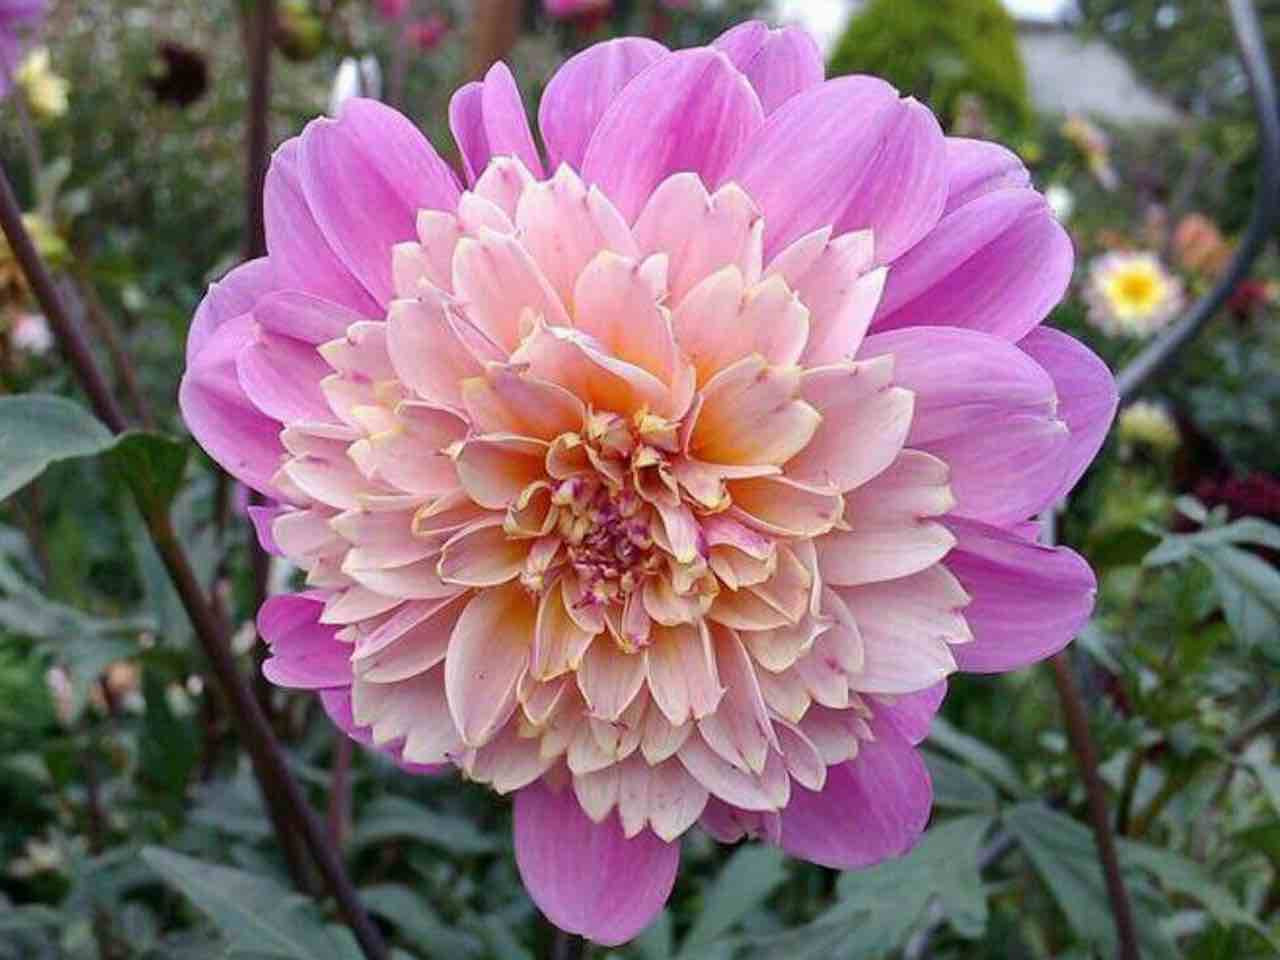 Dahlia 'Take Off' lilac and pink bloom